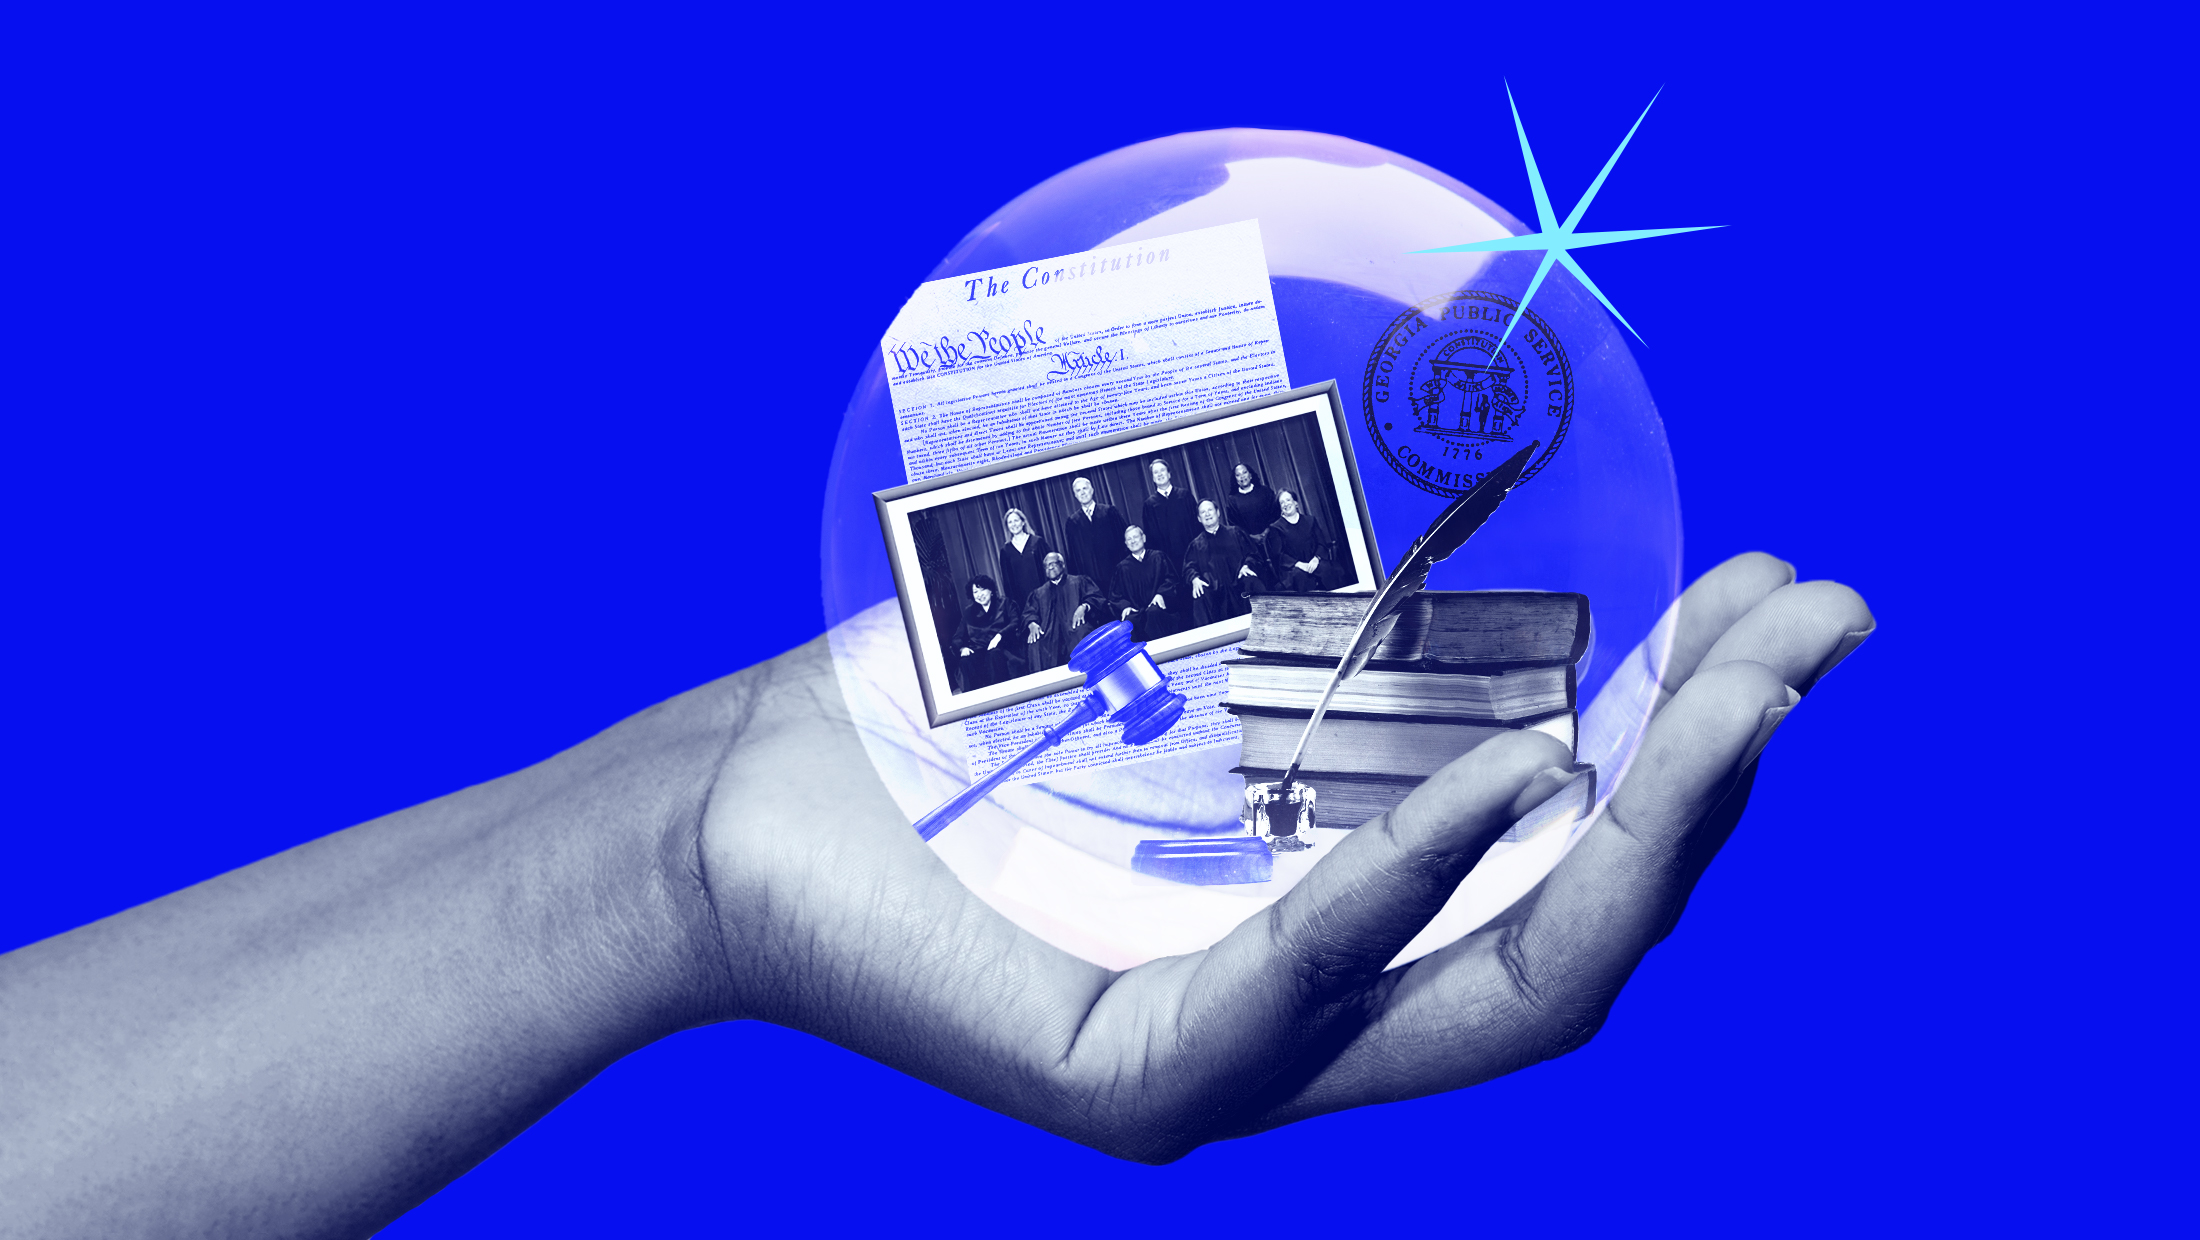 A bright blue background with a hand holding a crystal ball revealing a gavel, a picture of the nine U.S. Supreme Court justices, the U.S. Constitution, the logo for the Georgia Public Service Commission, a stack of books and a quill